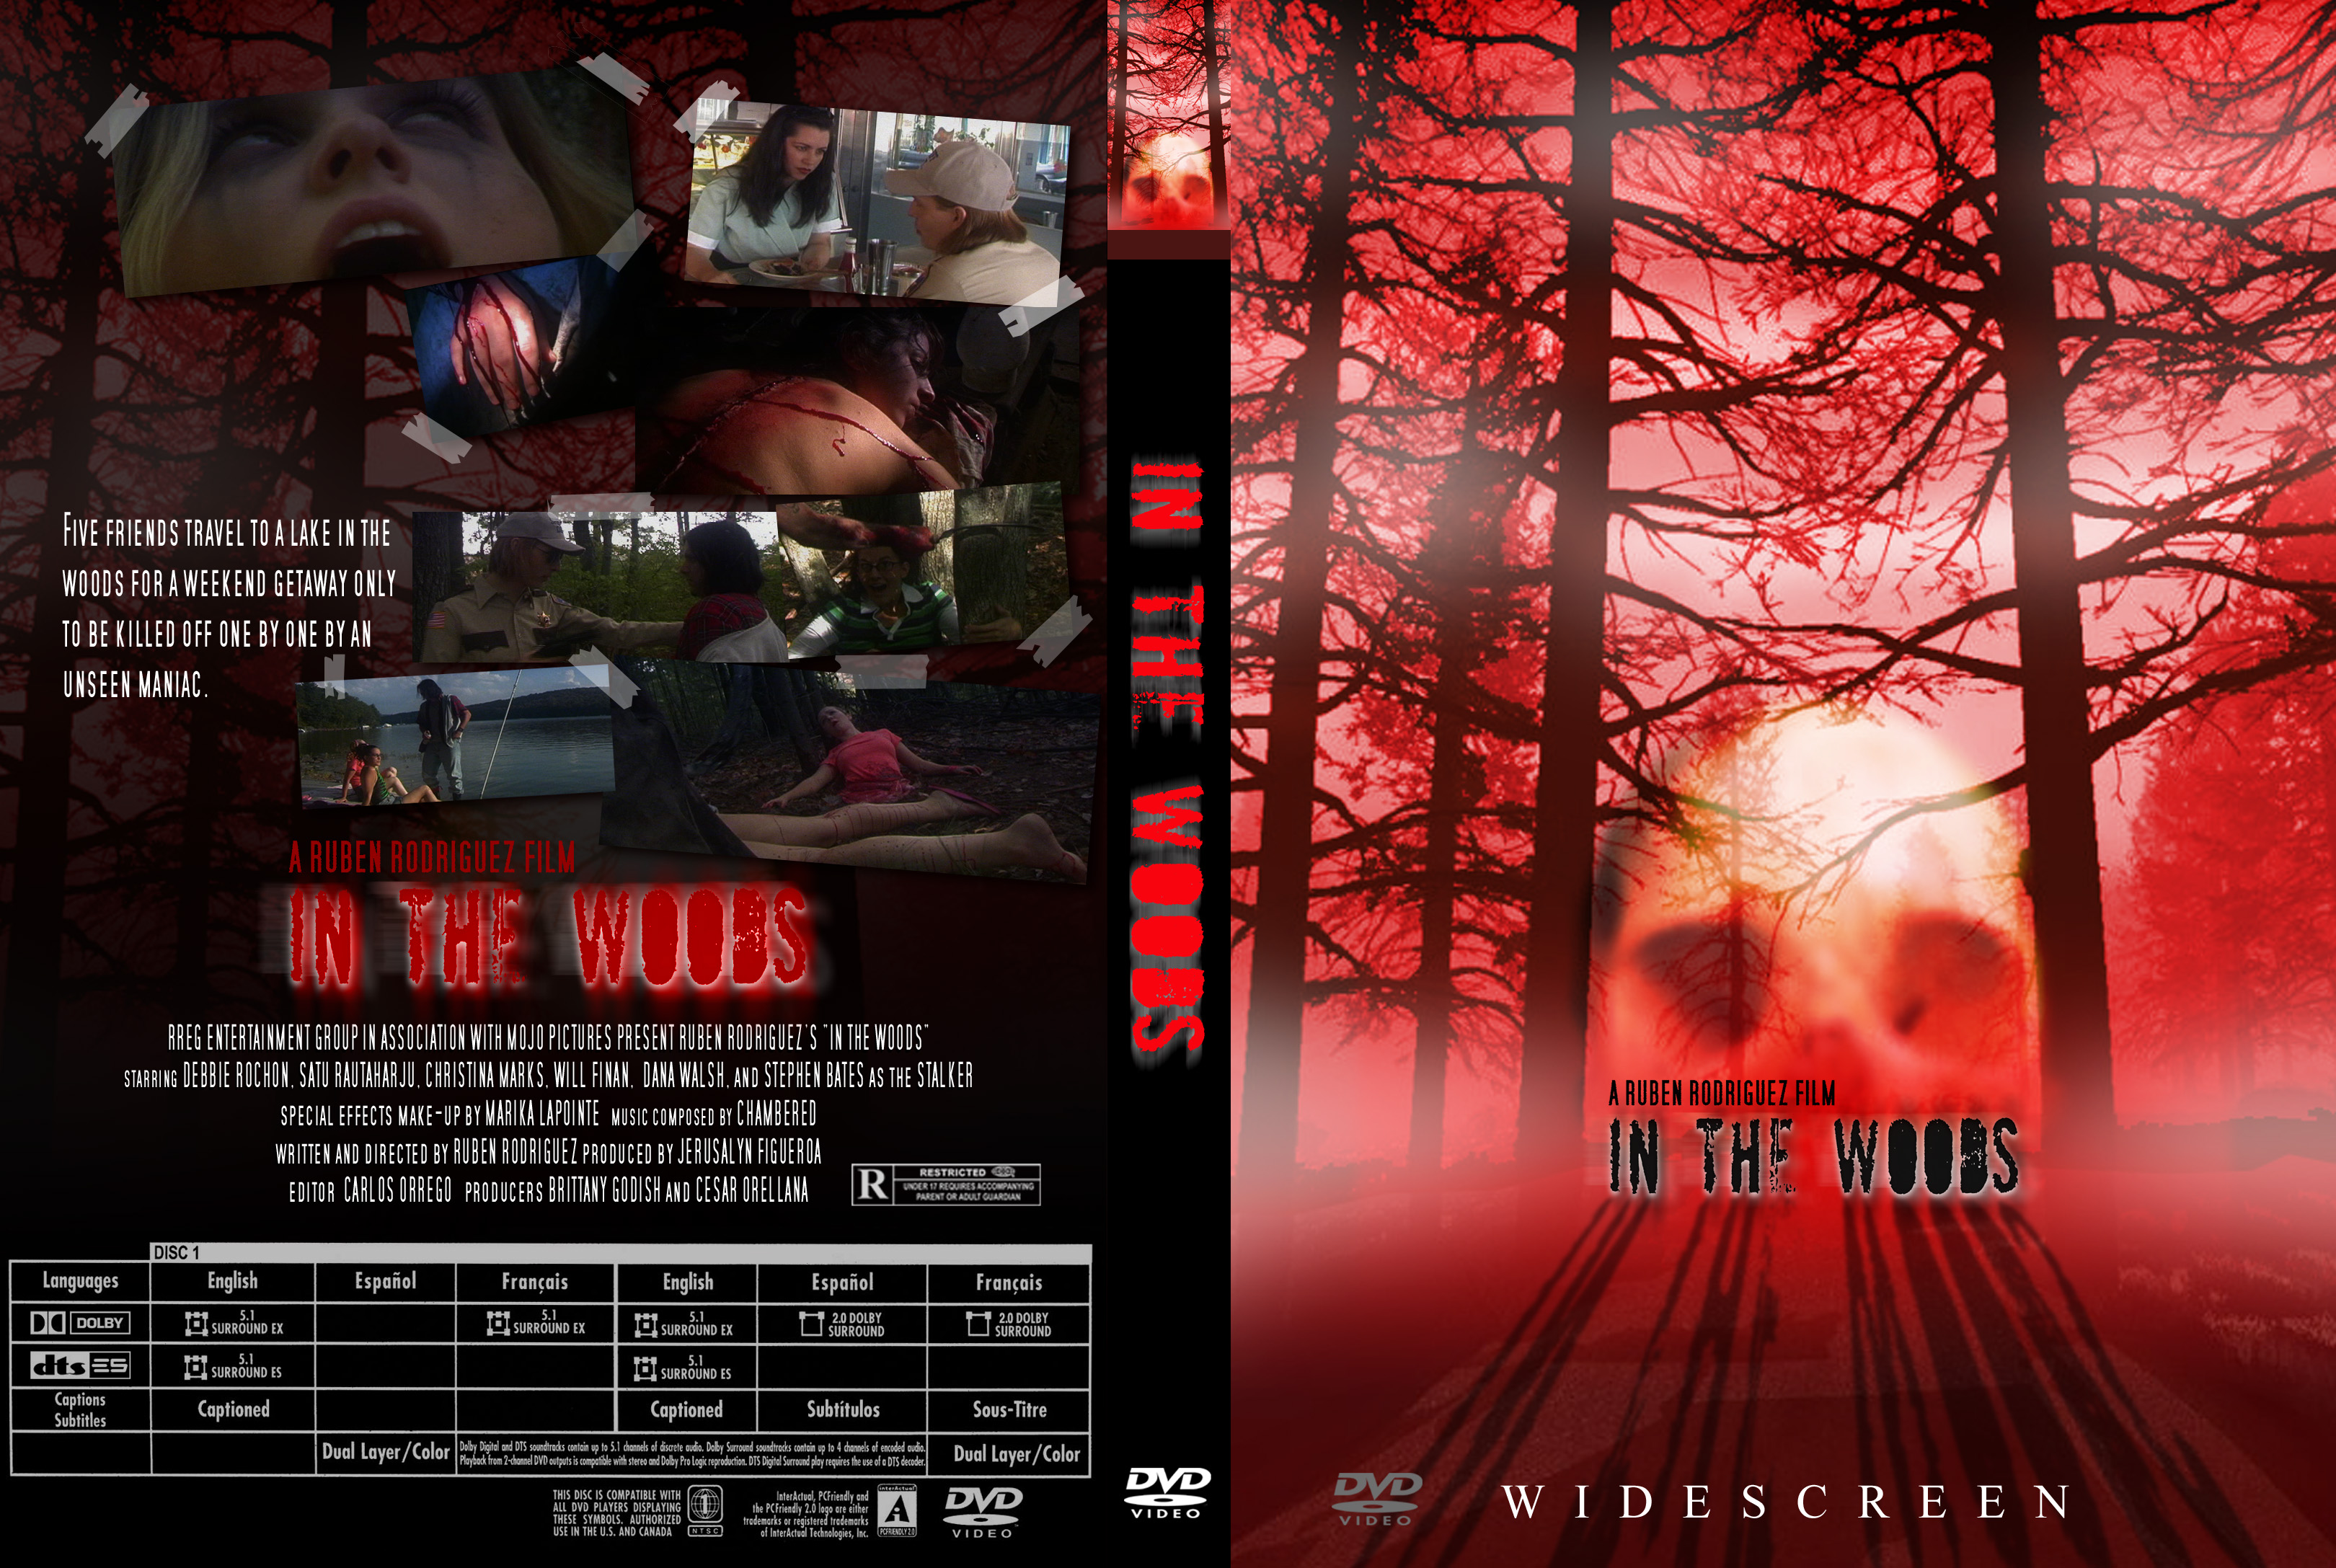 IN THE WOODS DVD Cover Art